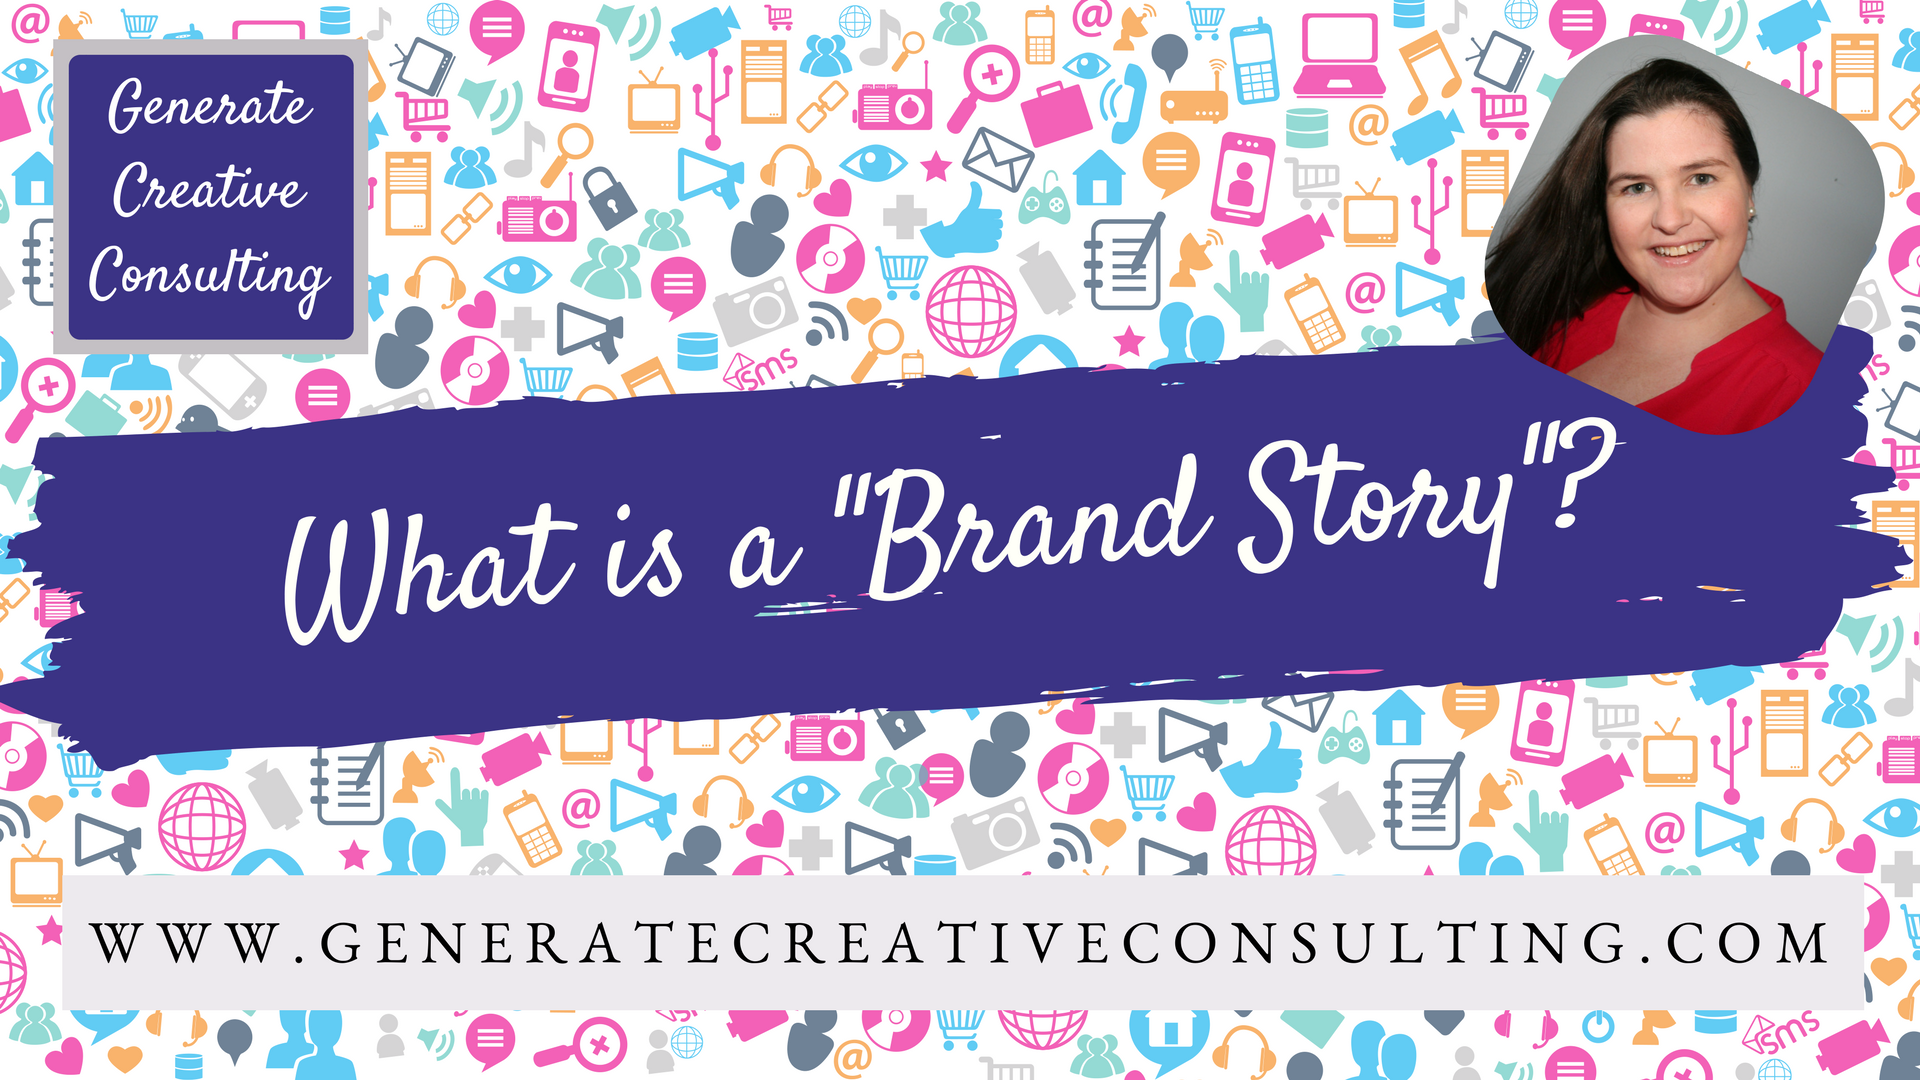 What is a “Brand Story”?